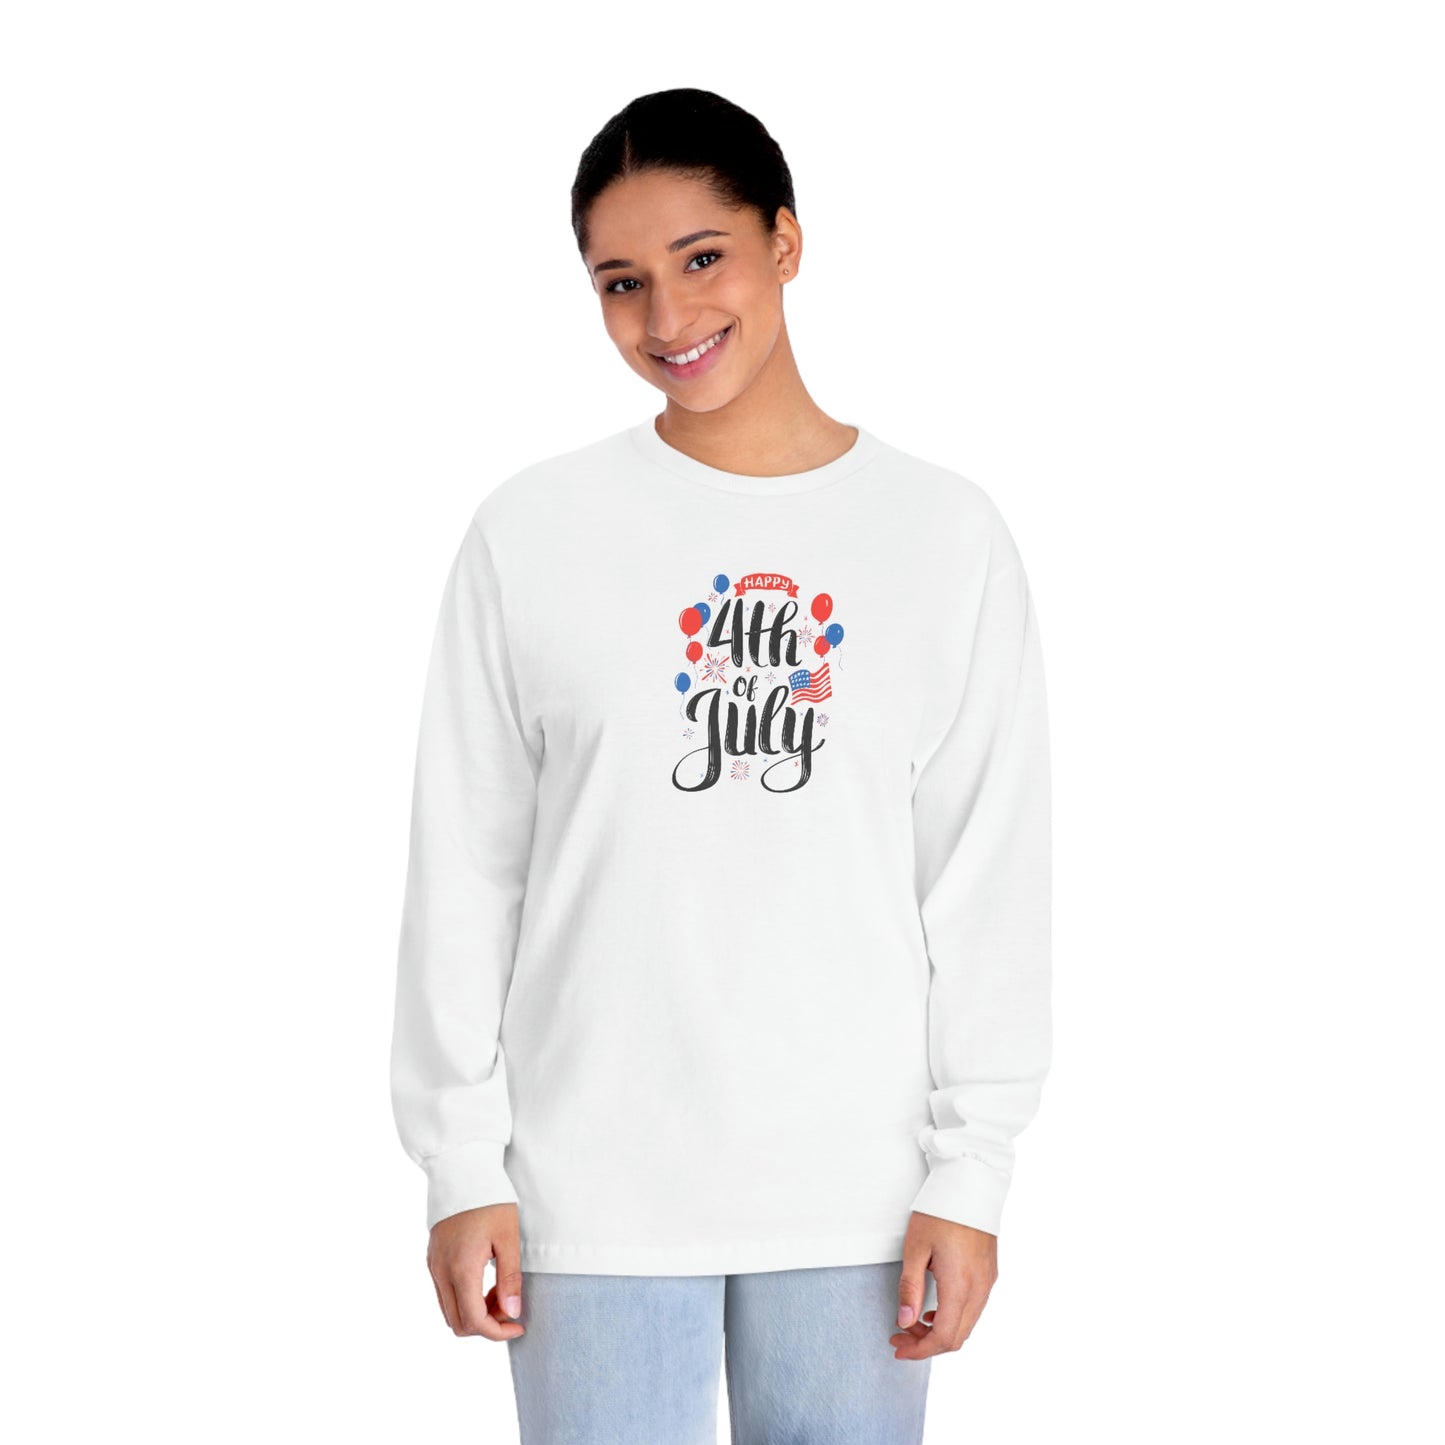 A 4th of July Long Sleeve Comfortable Tee  Happy 4th of July Shirt Unisex Classic Long Sleeve T-Shirt